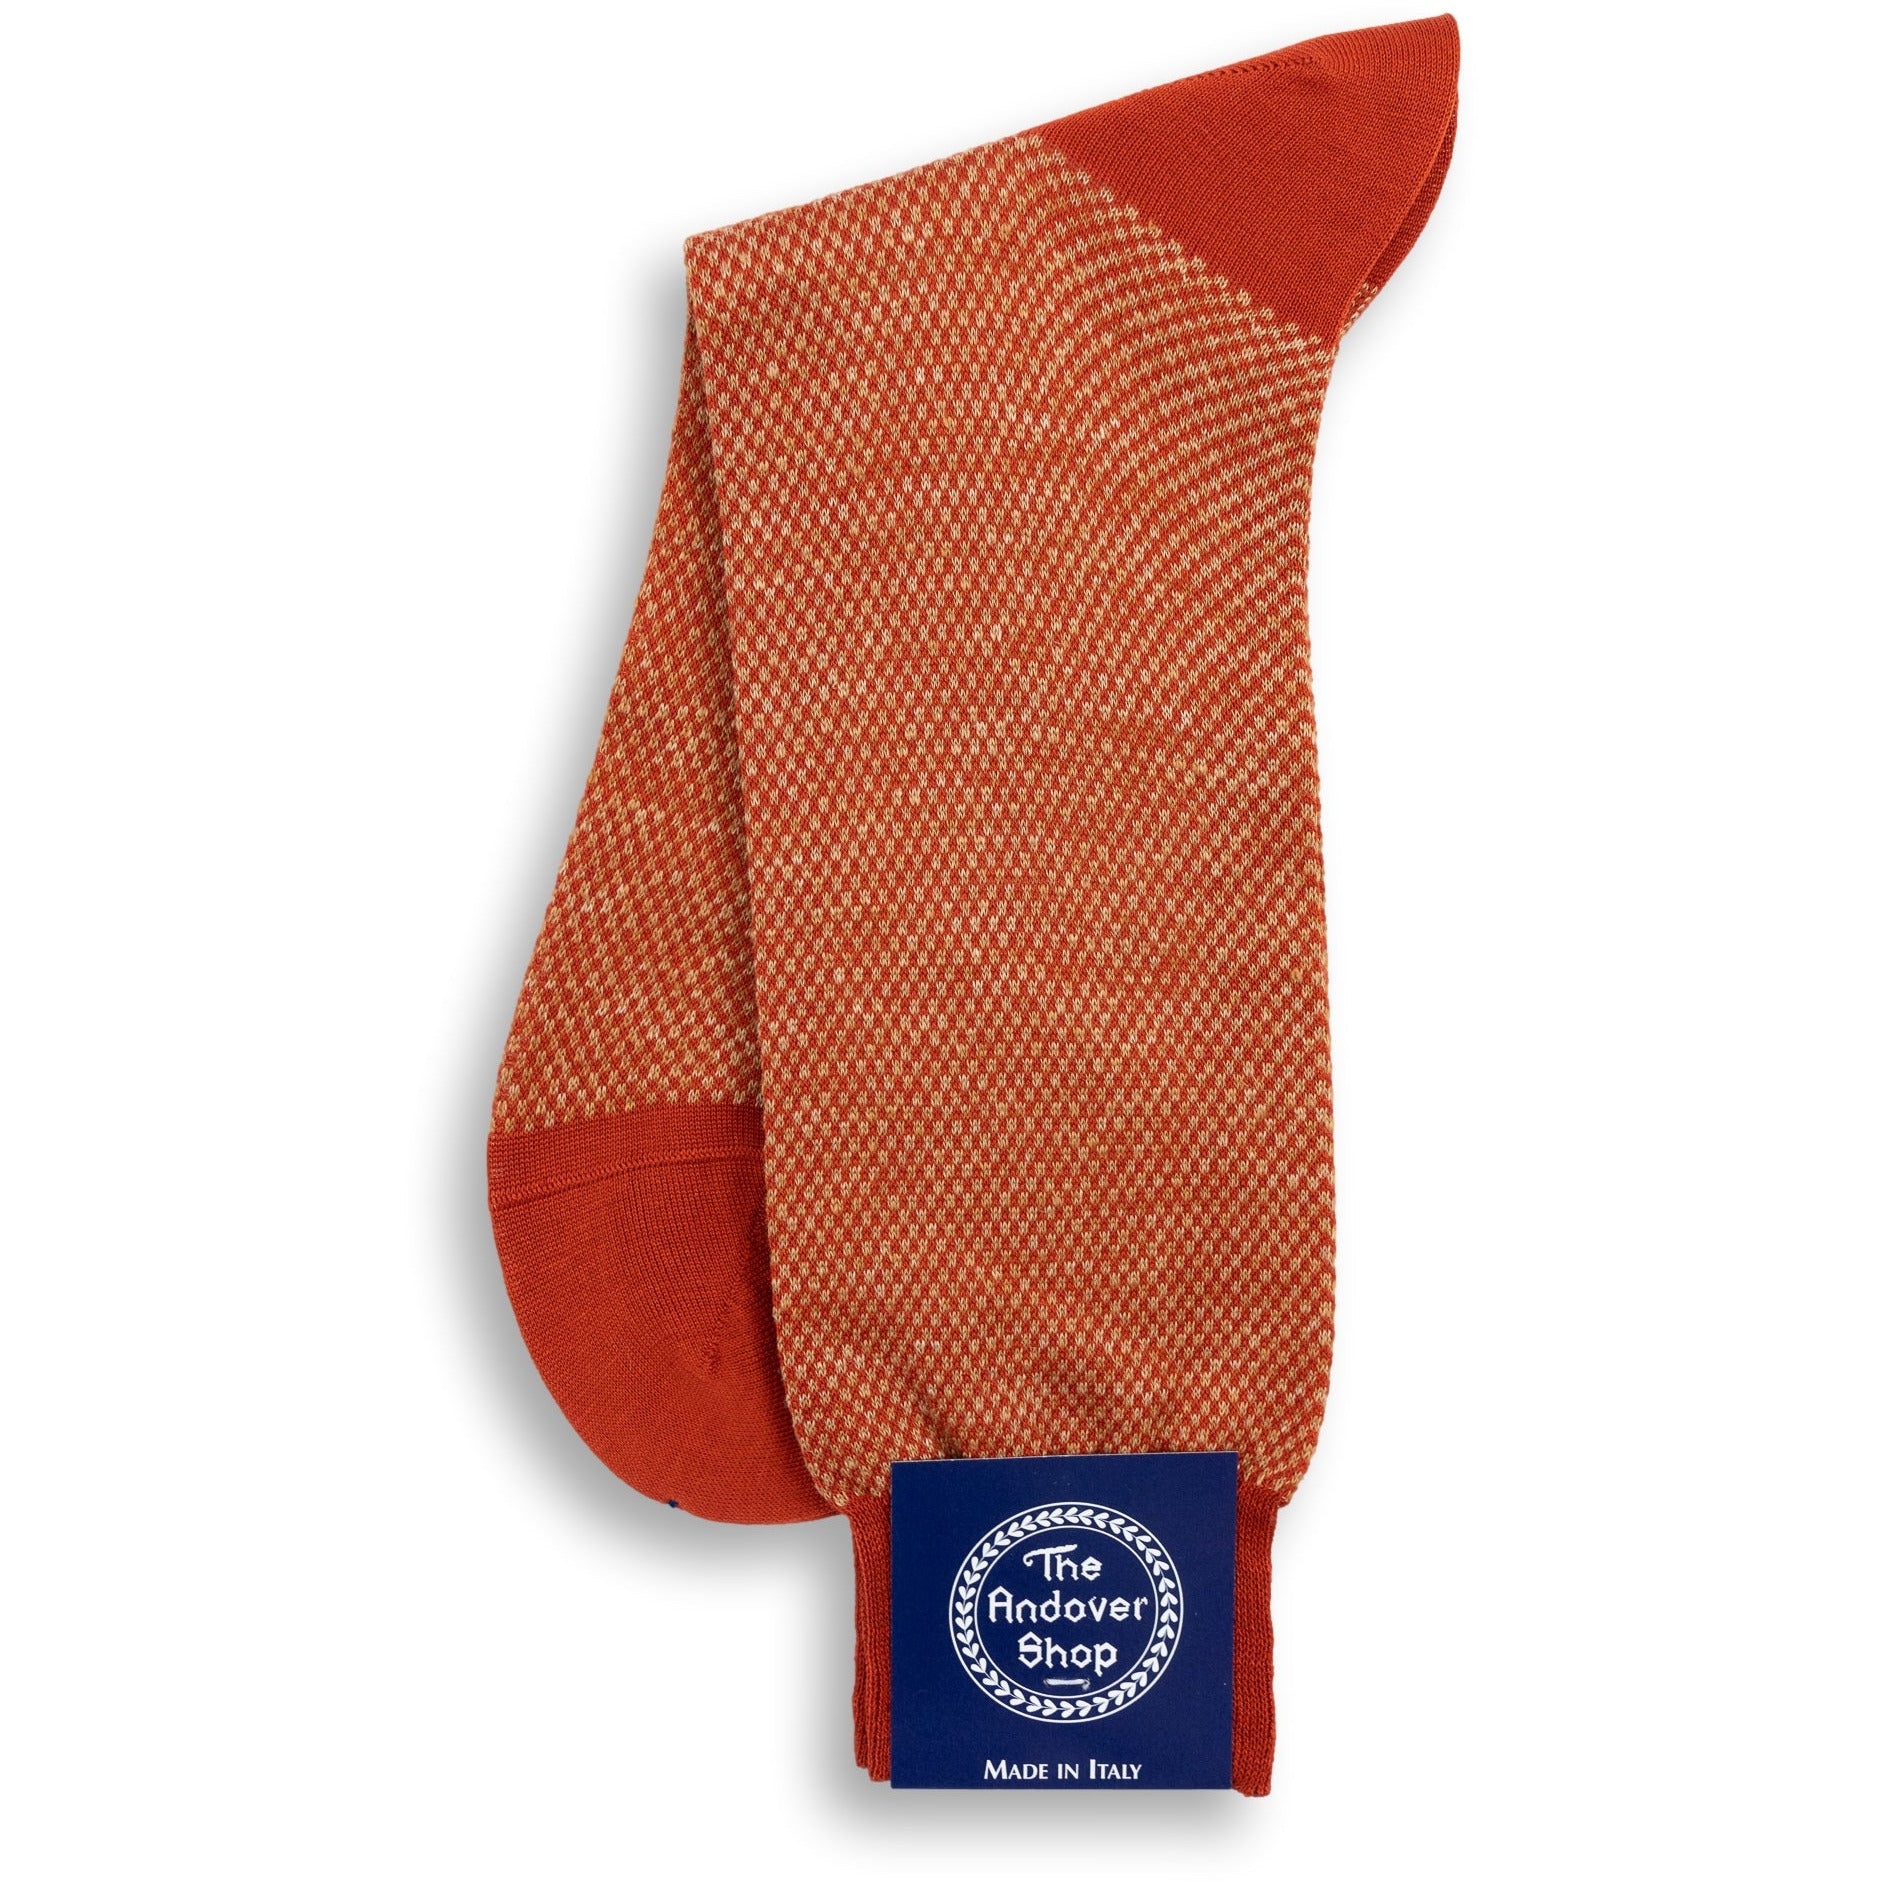 Mid-Calf Cotton and Linen Square and Birdseye Patterned Dress Sock